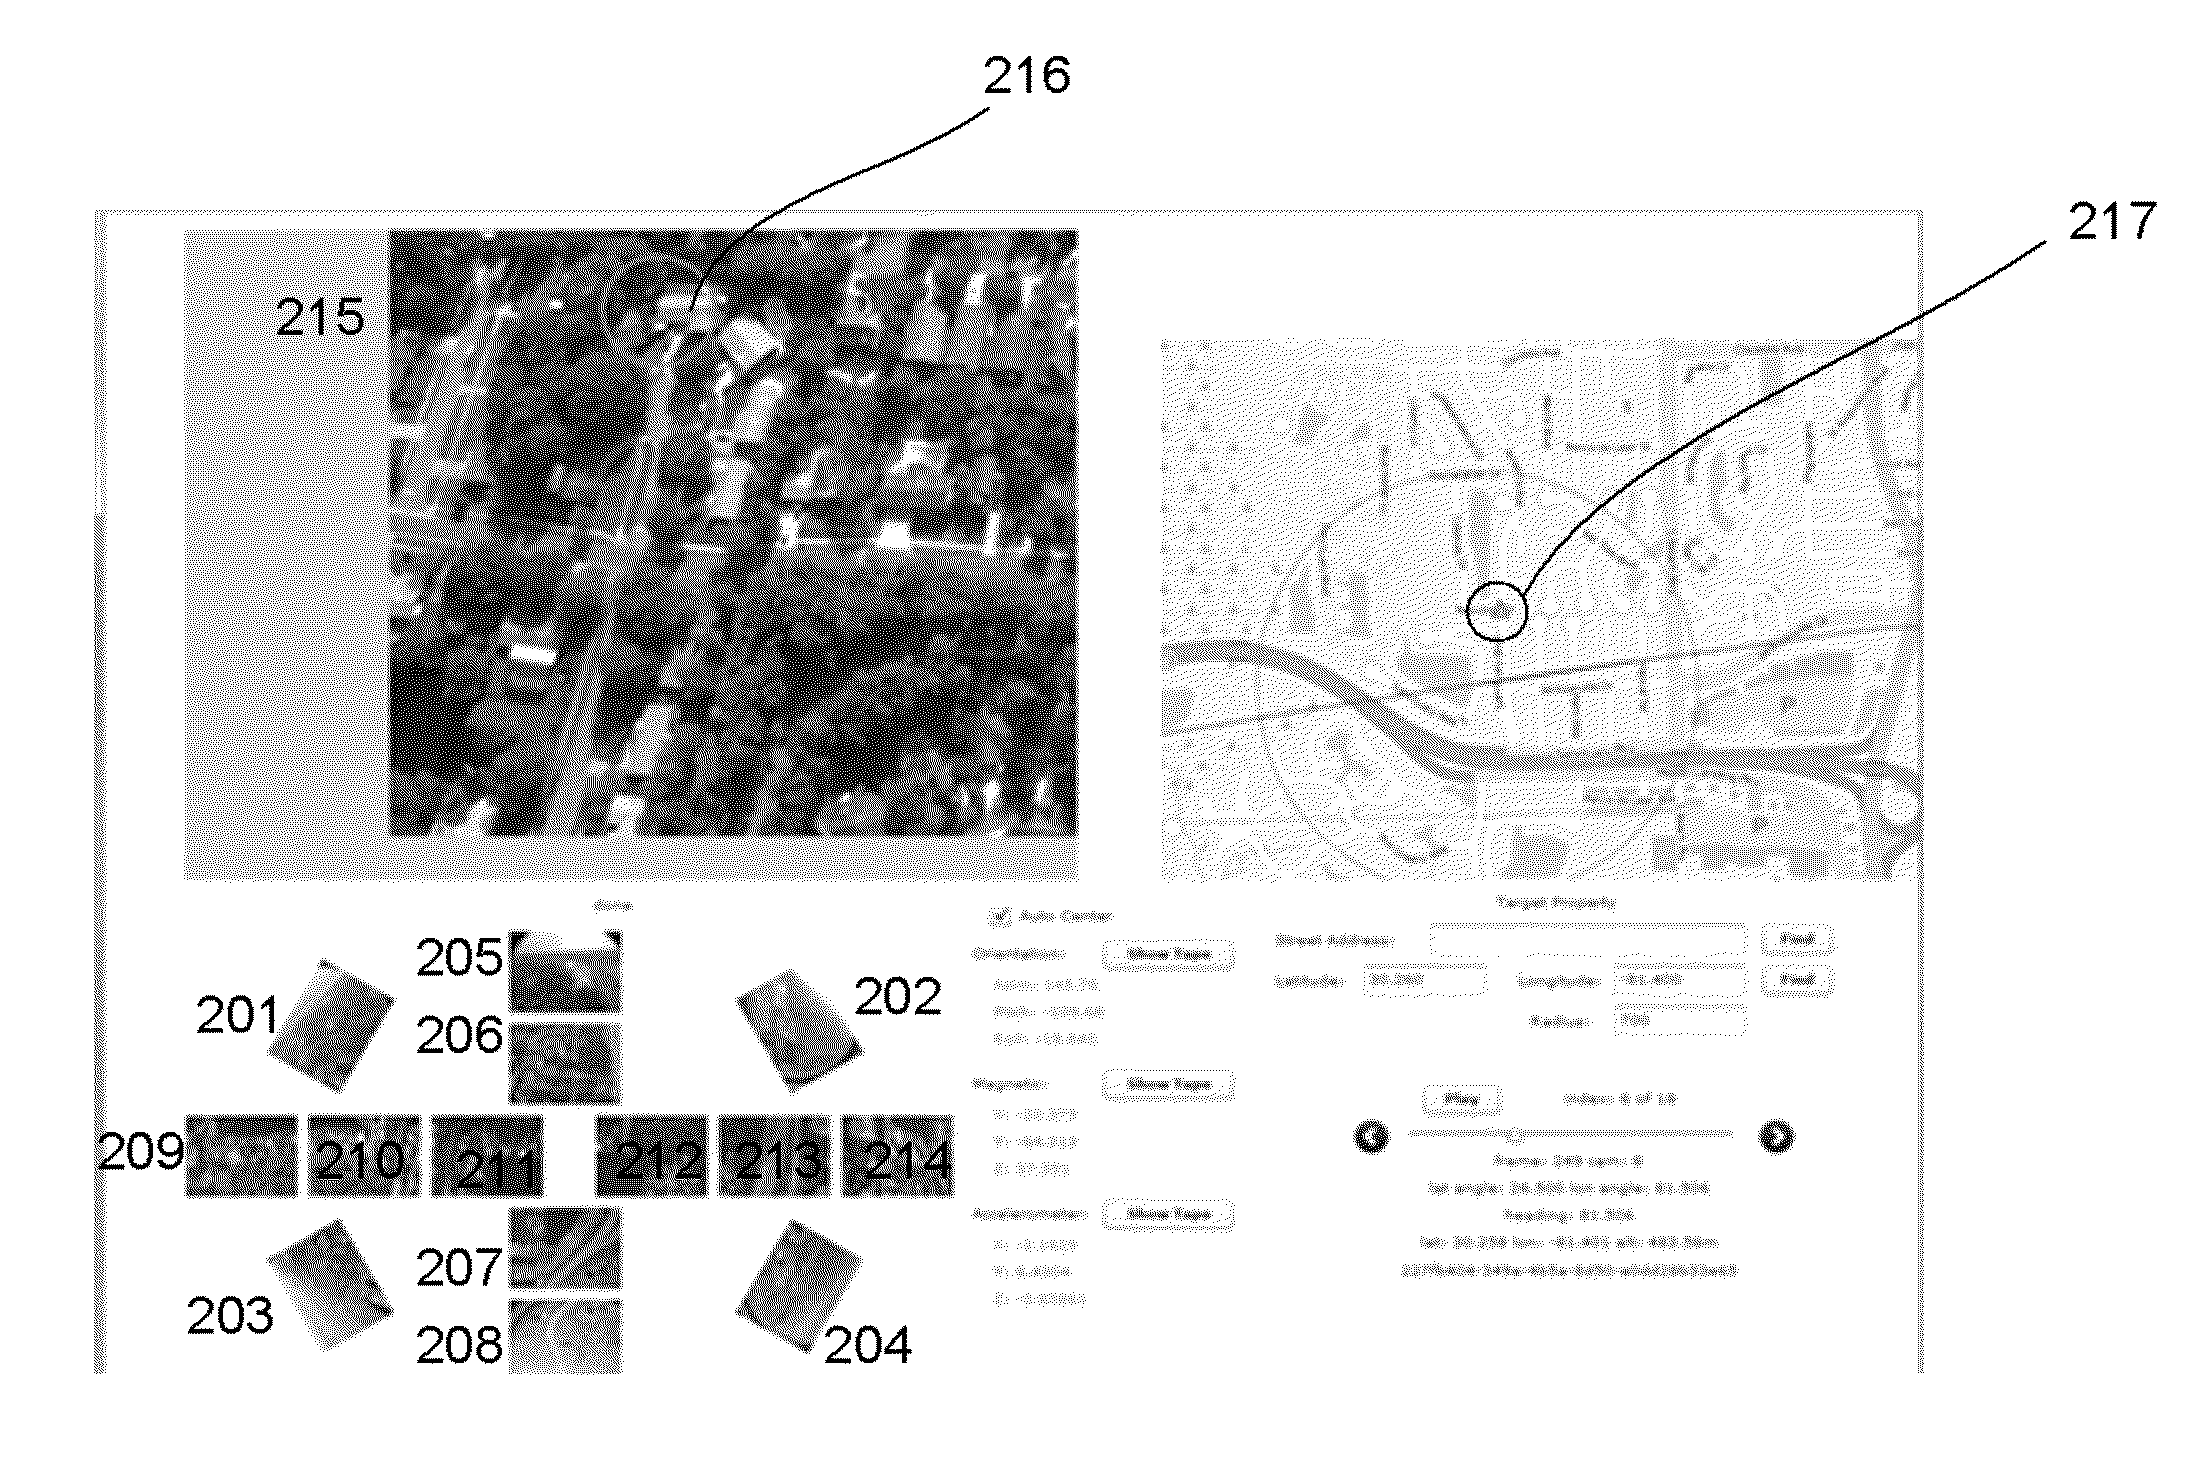 Method and Apparatus for Processing Aerial Imagery with Camera Location and Orientation for Simulating Smooth Video Flyby